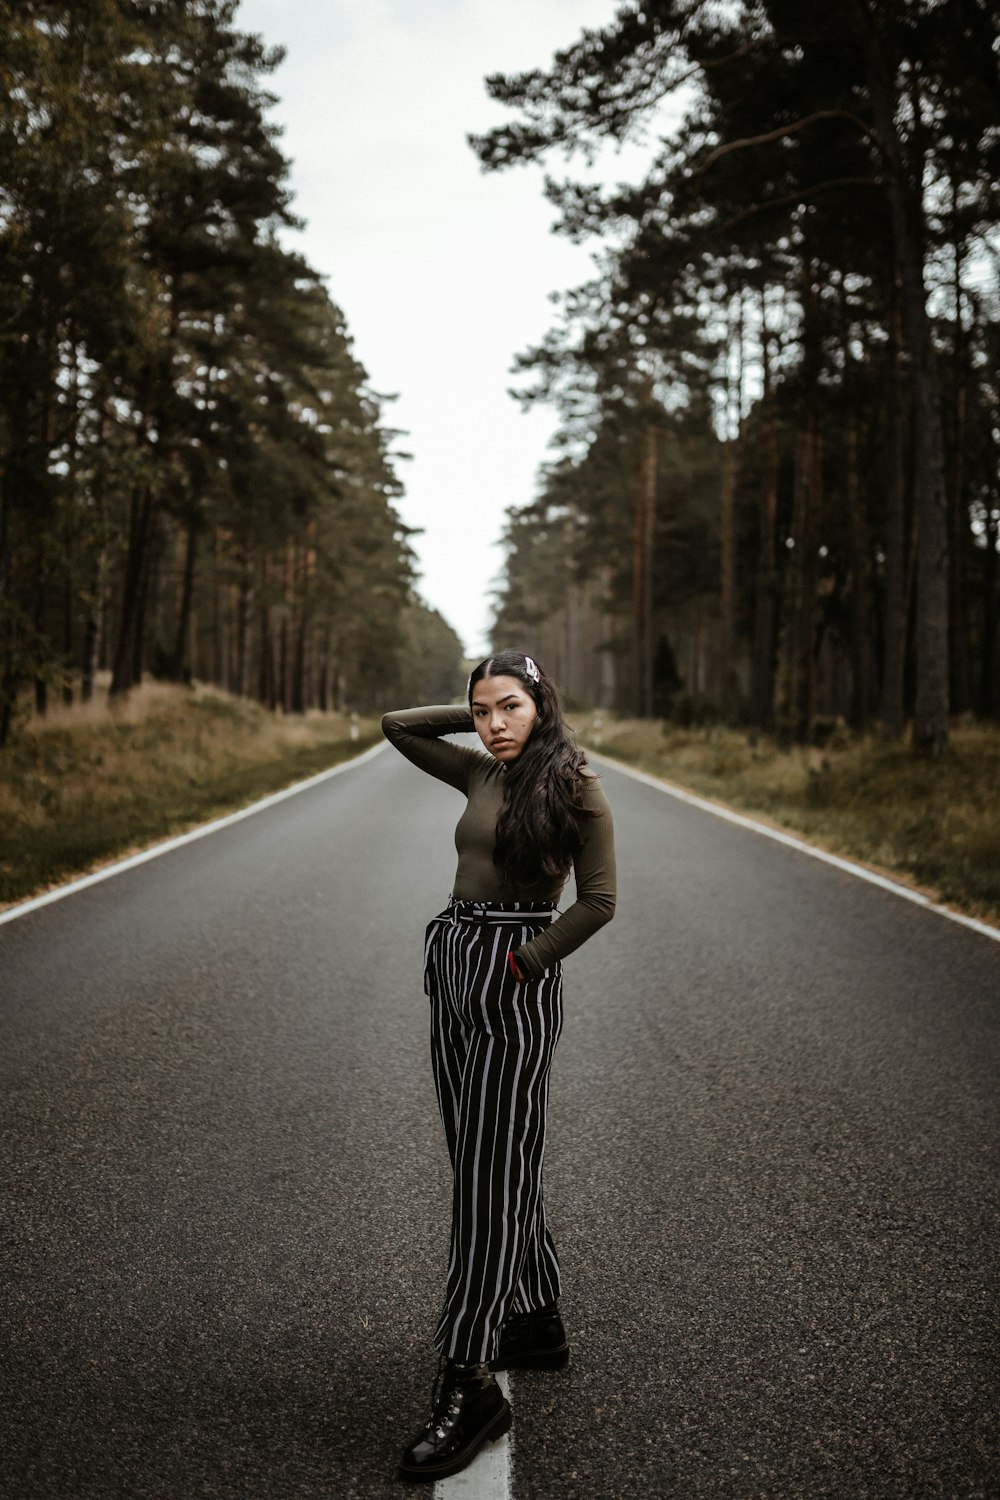 woman in black and white stripe dress standing on road during daytime